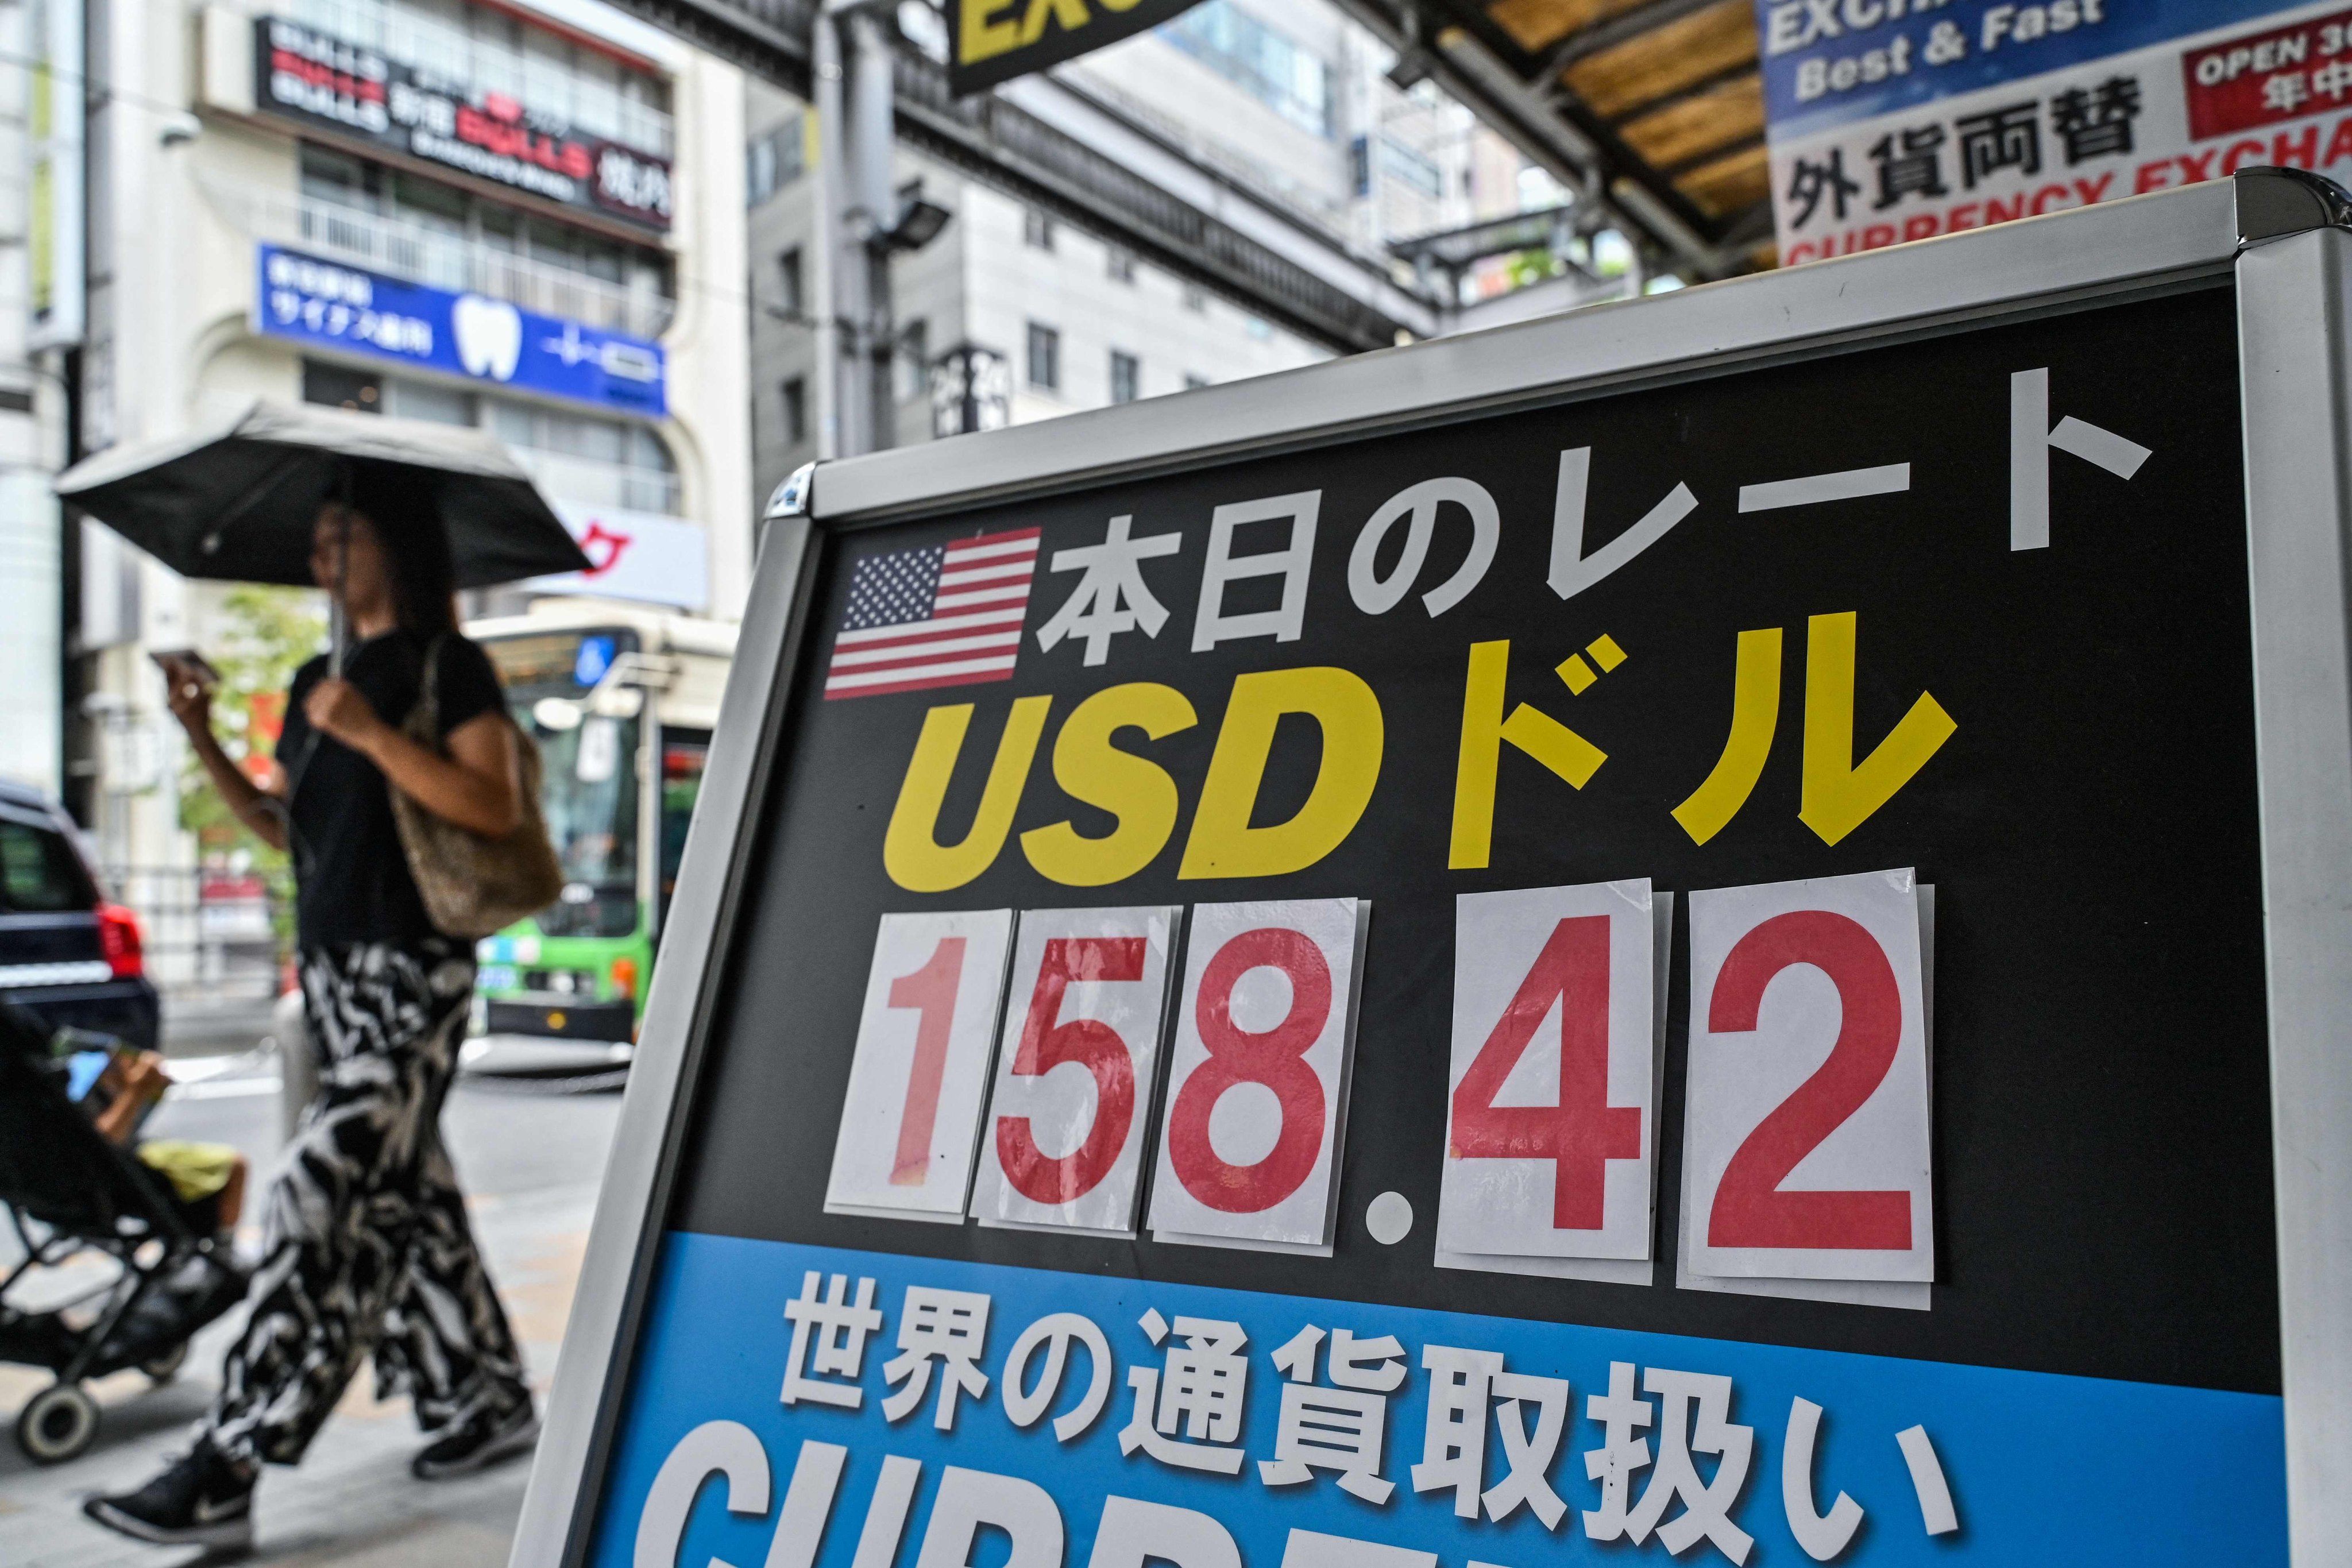 A woman walks past a currency exchange shop in central Tokyo on June 30, after the yen slid to its weakest value against the US dollar since 1986. It’s time to end the weak-yen policy, which has over the years deadened the urgency for Tokyo to raise its economic game and increase competitiveness. Photo: AFP